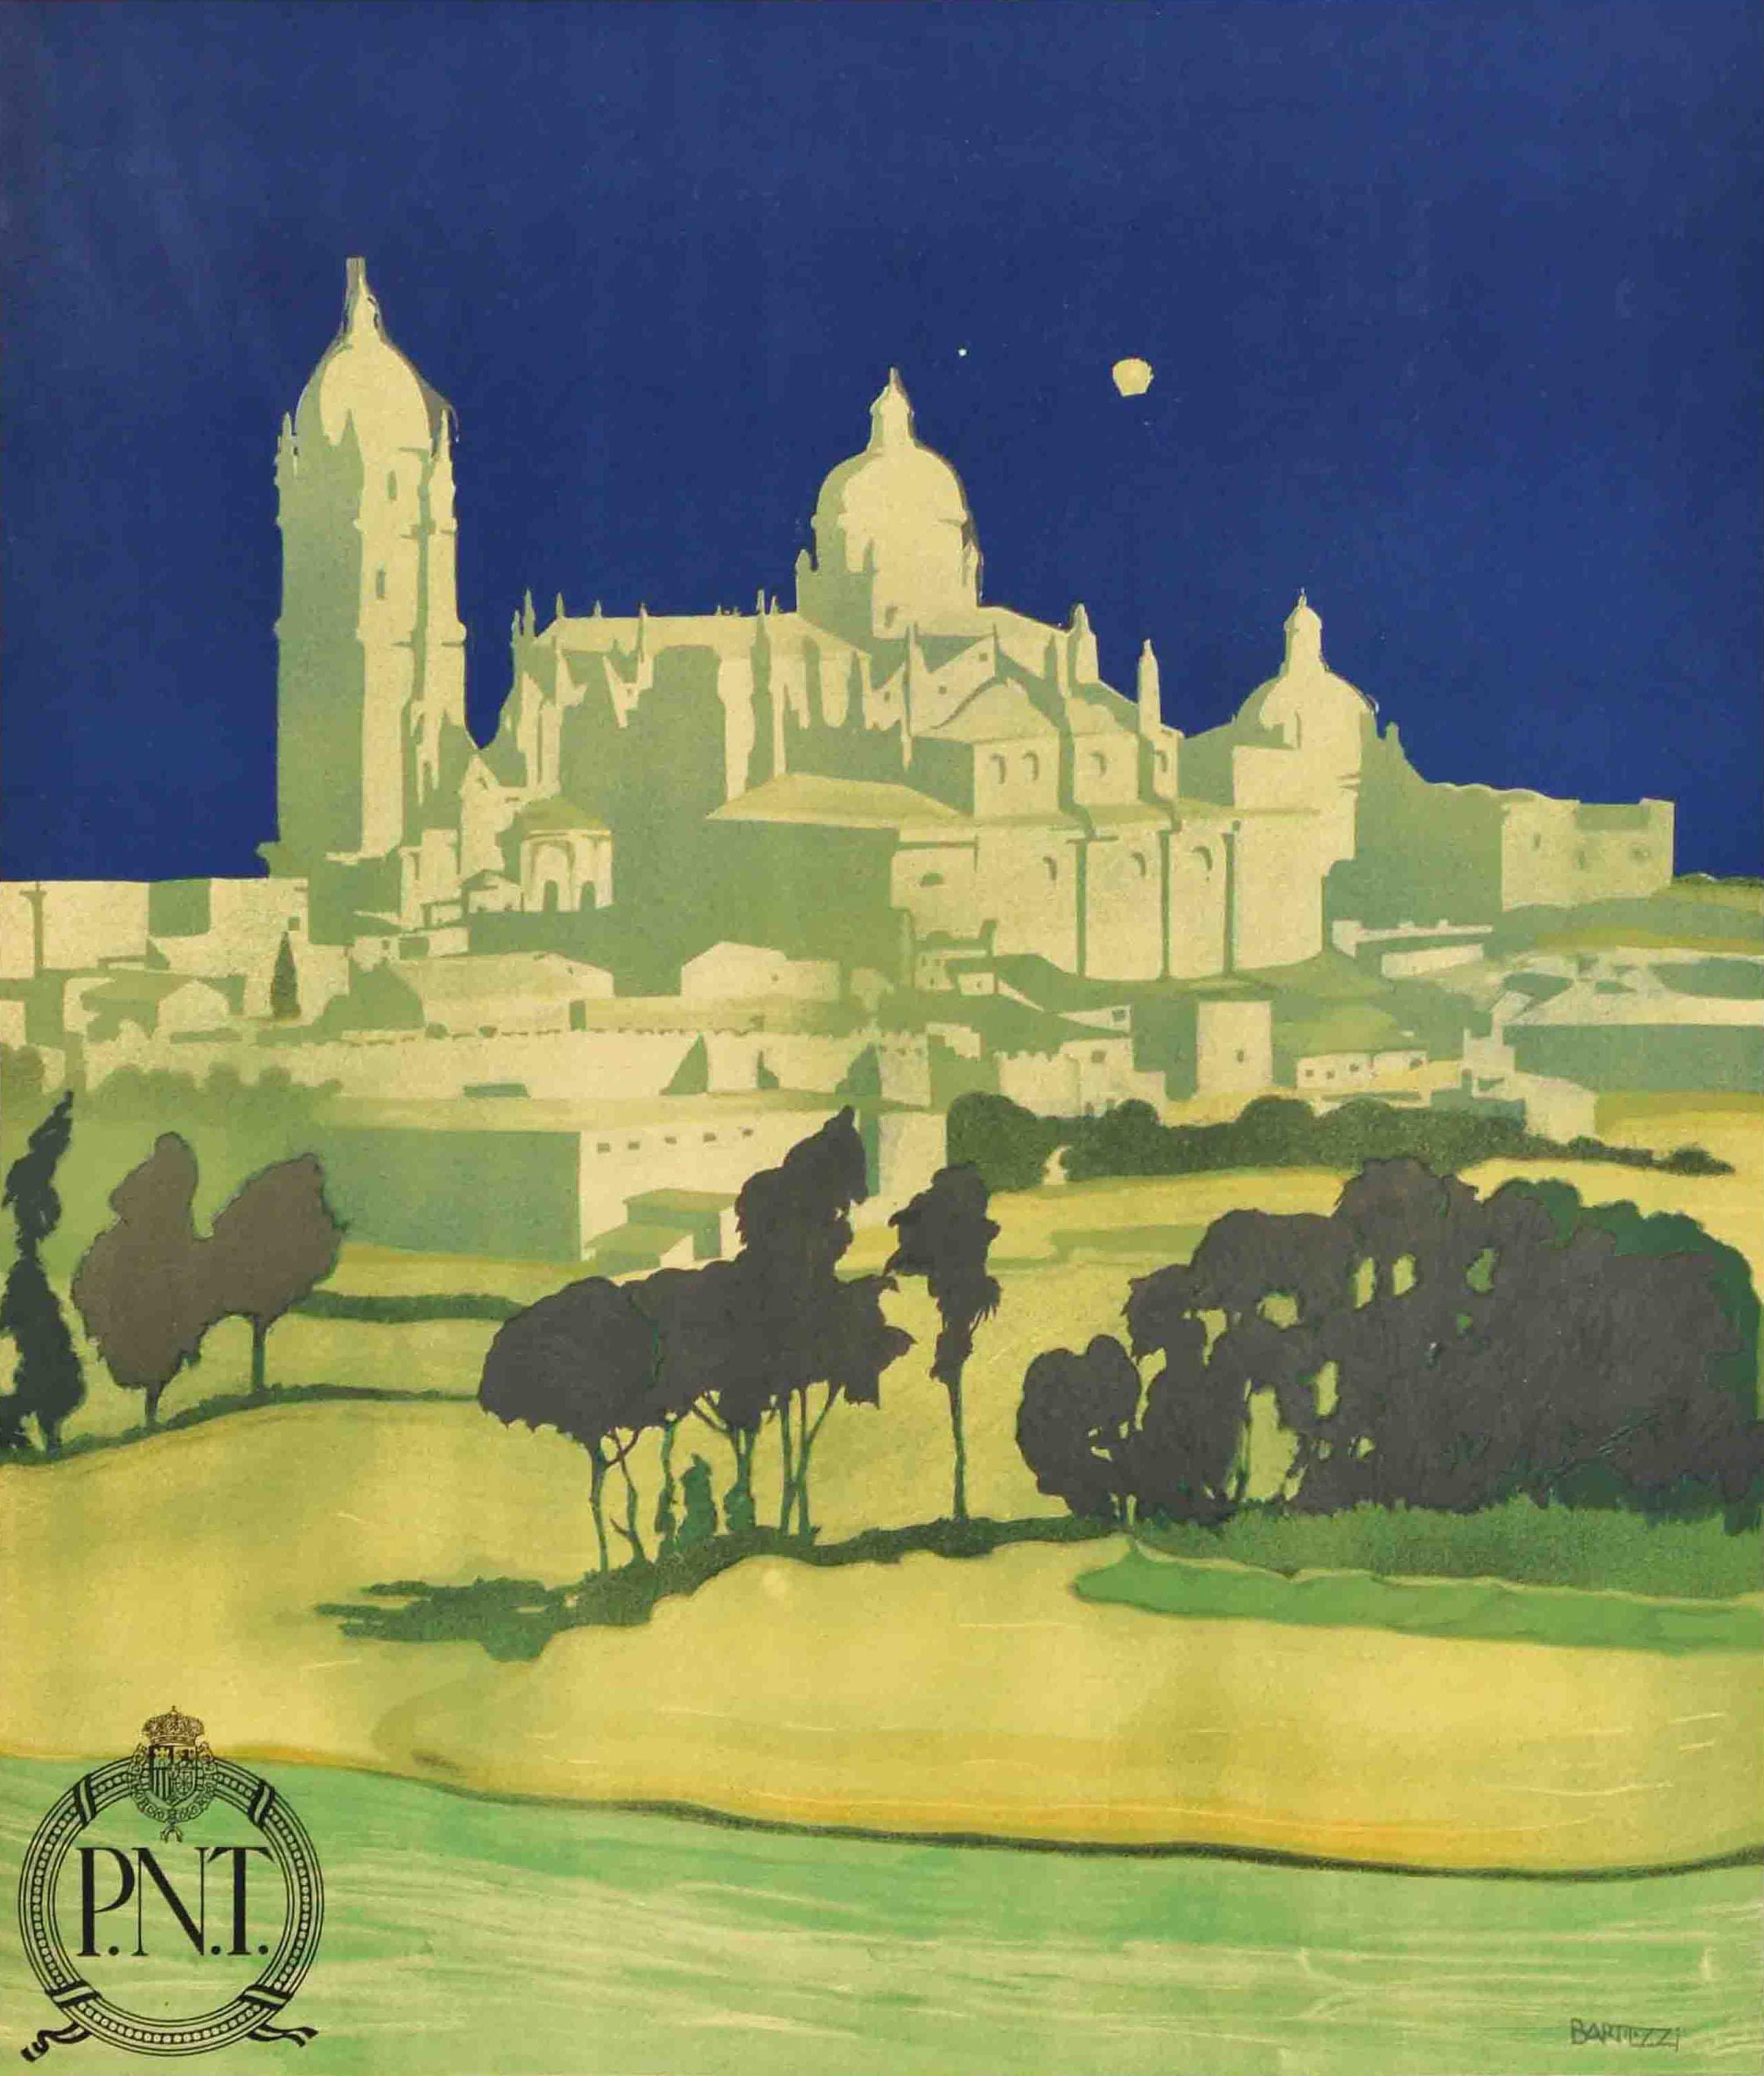 Original vintage travel poster issued by the Spanish national tourist board Patronato Nacional del Turismo PNT for Salamanca the Glorious City of the Renaissance / Salamanca la Gloriosa Ciudad del Renacimiento featuring a stunning view of the